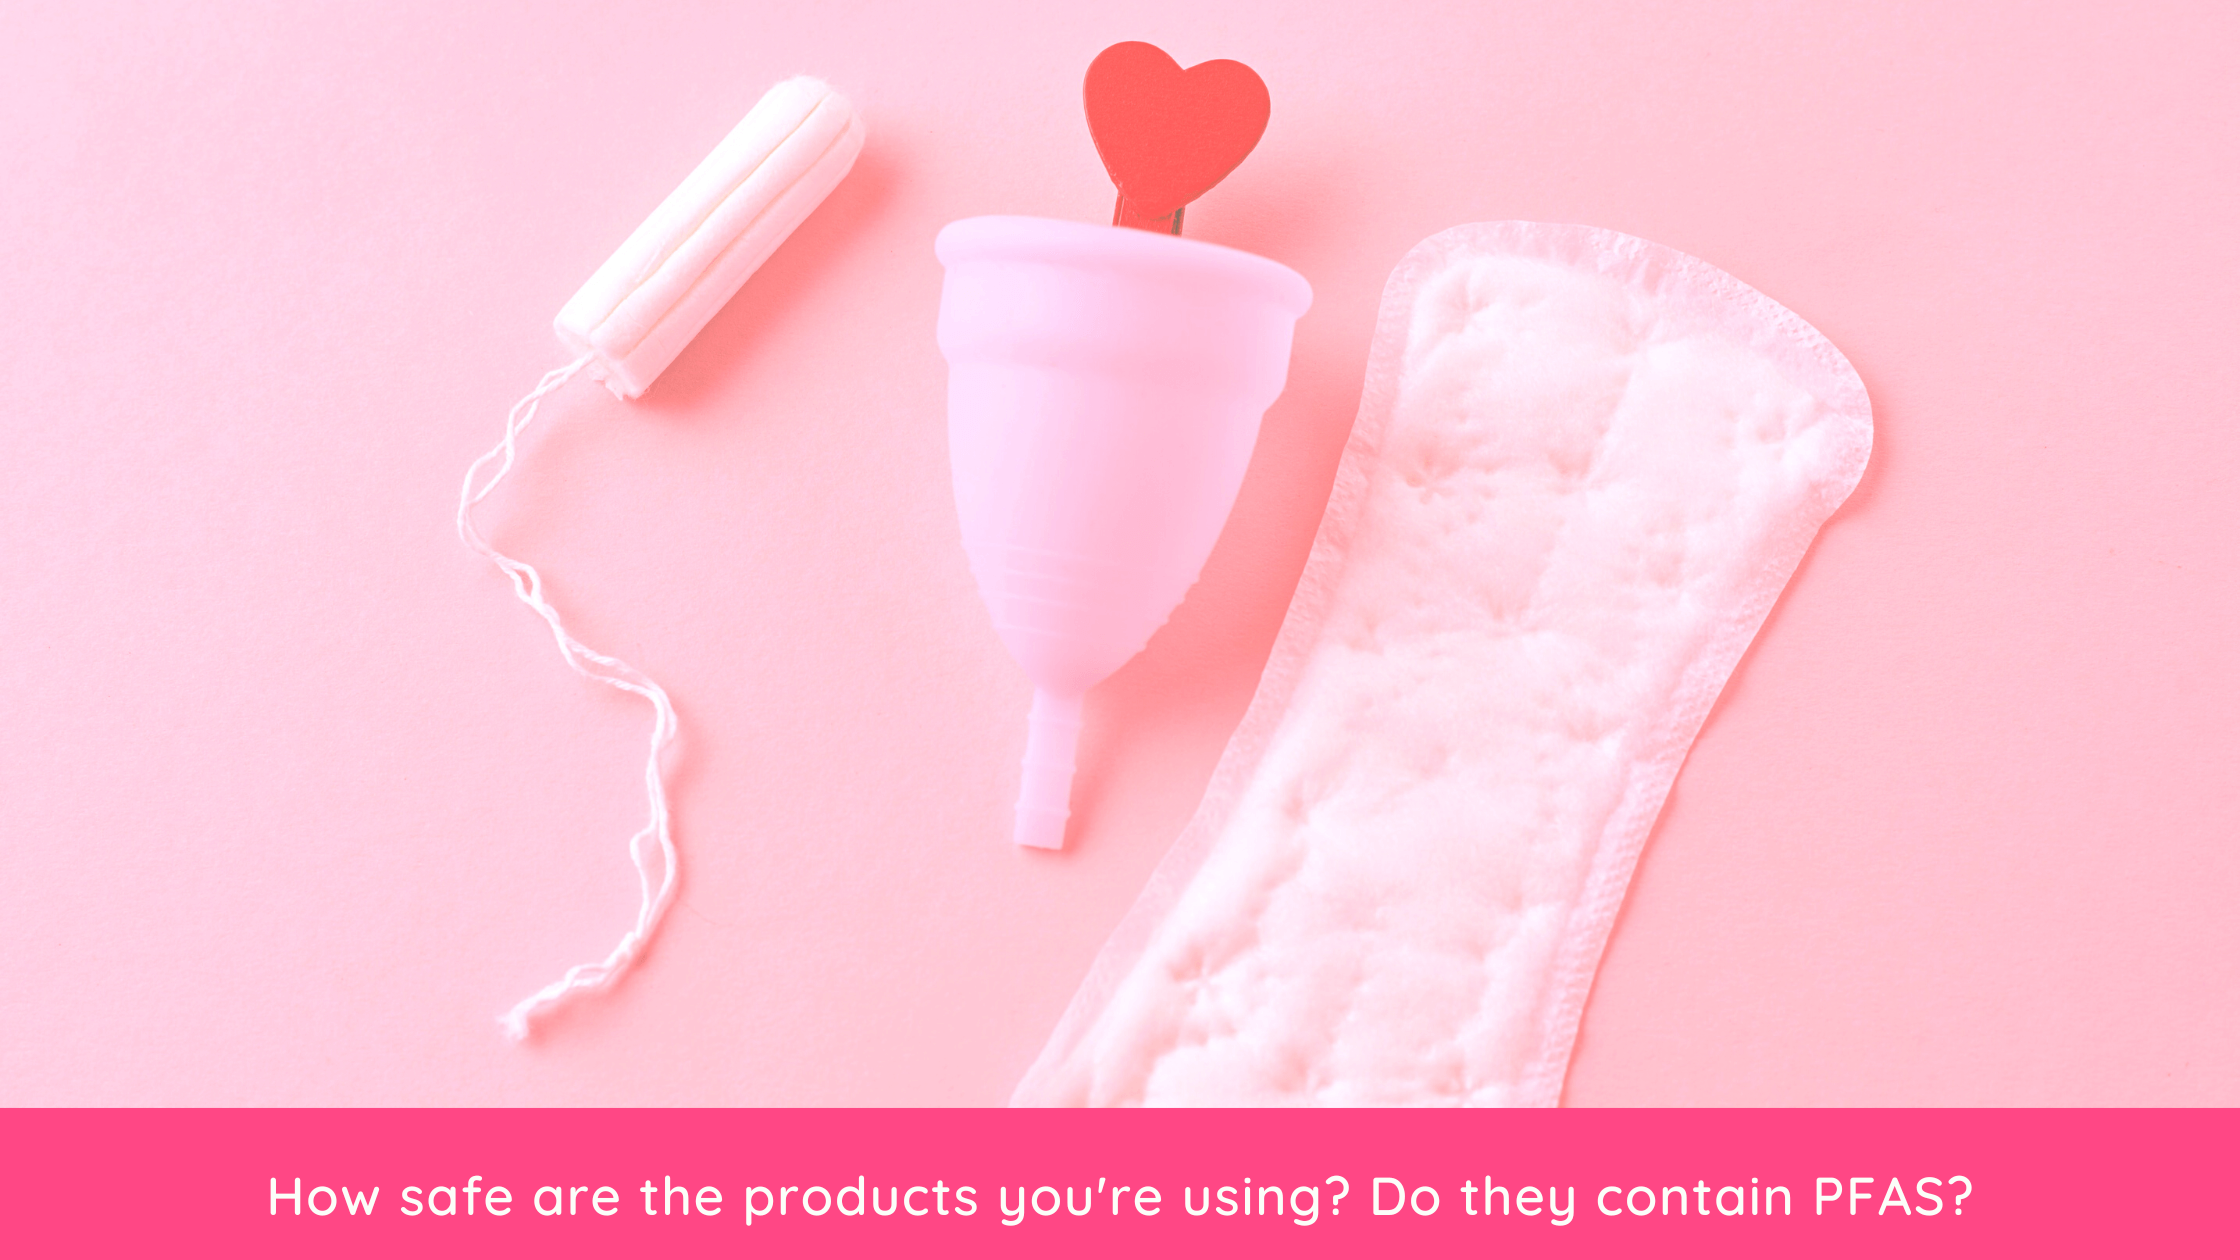 Let's talk about period toxicity  are our knickers safe